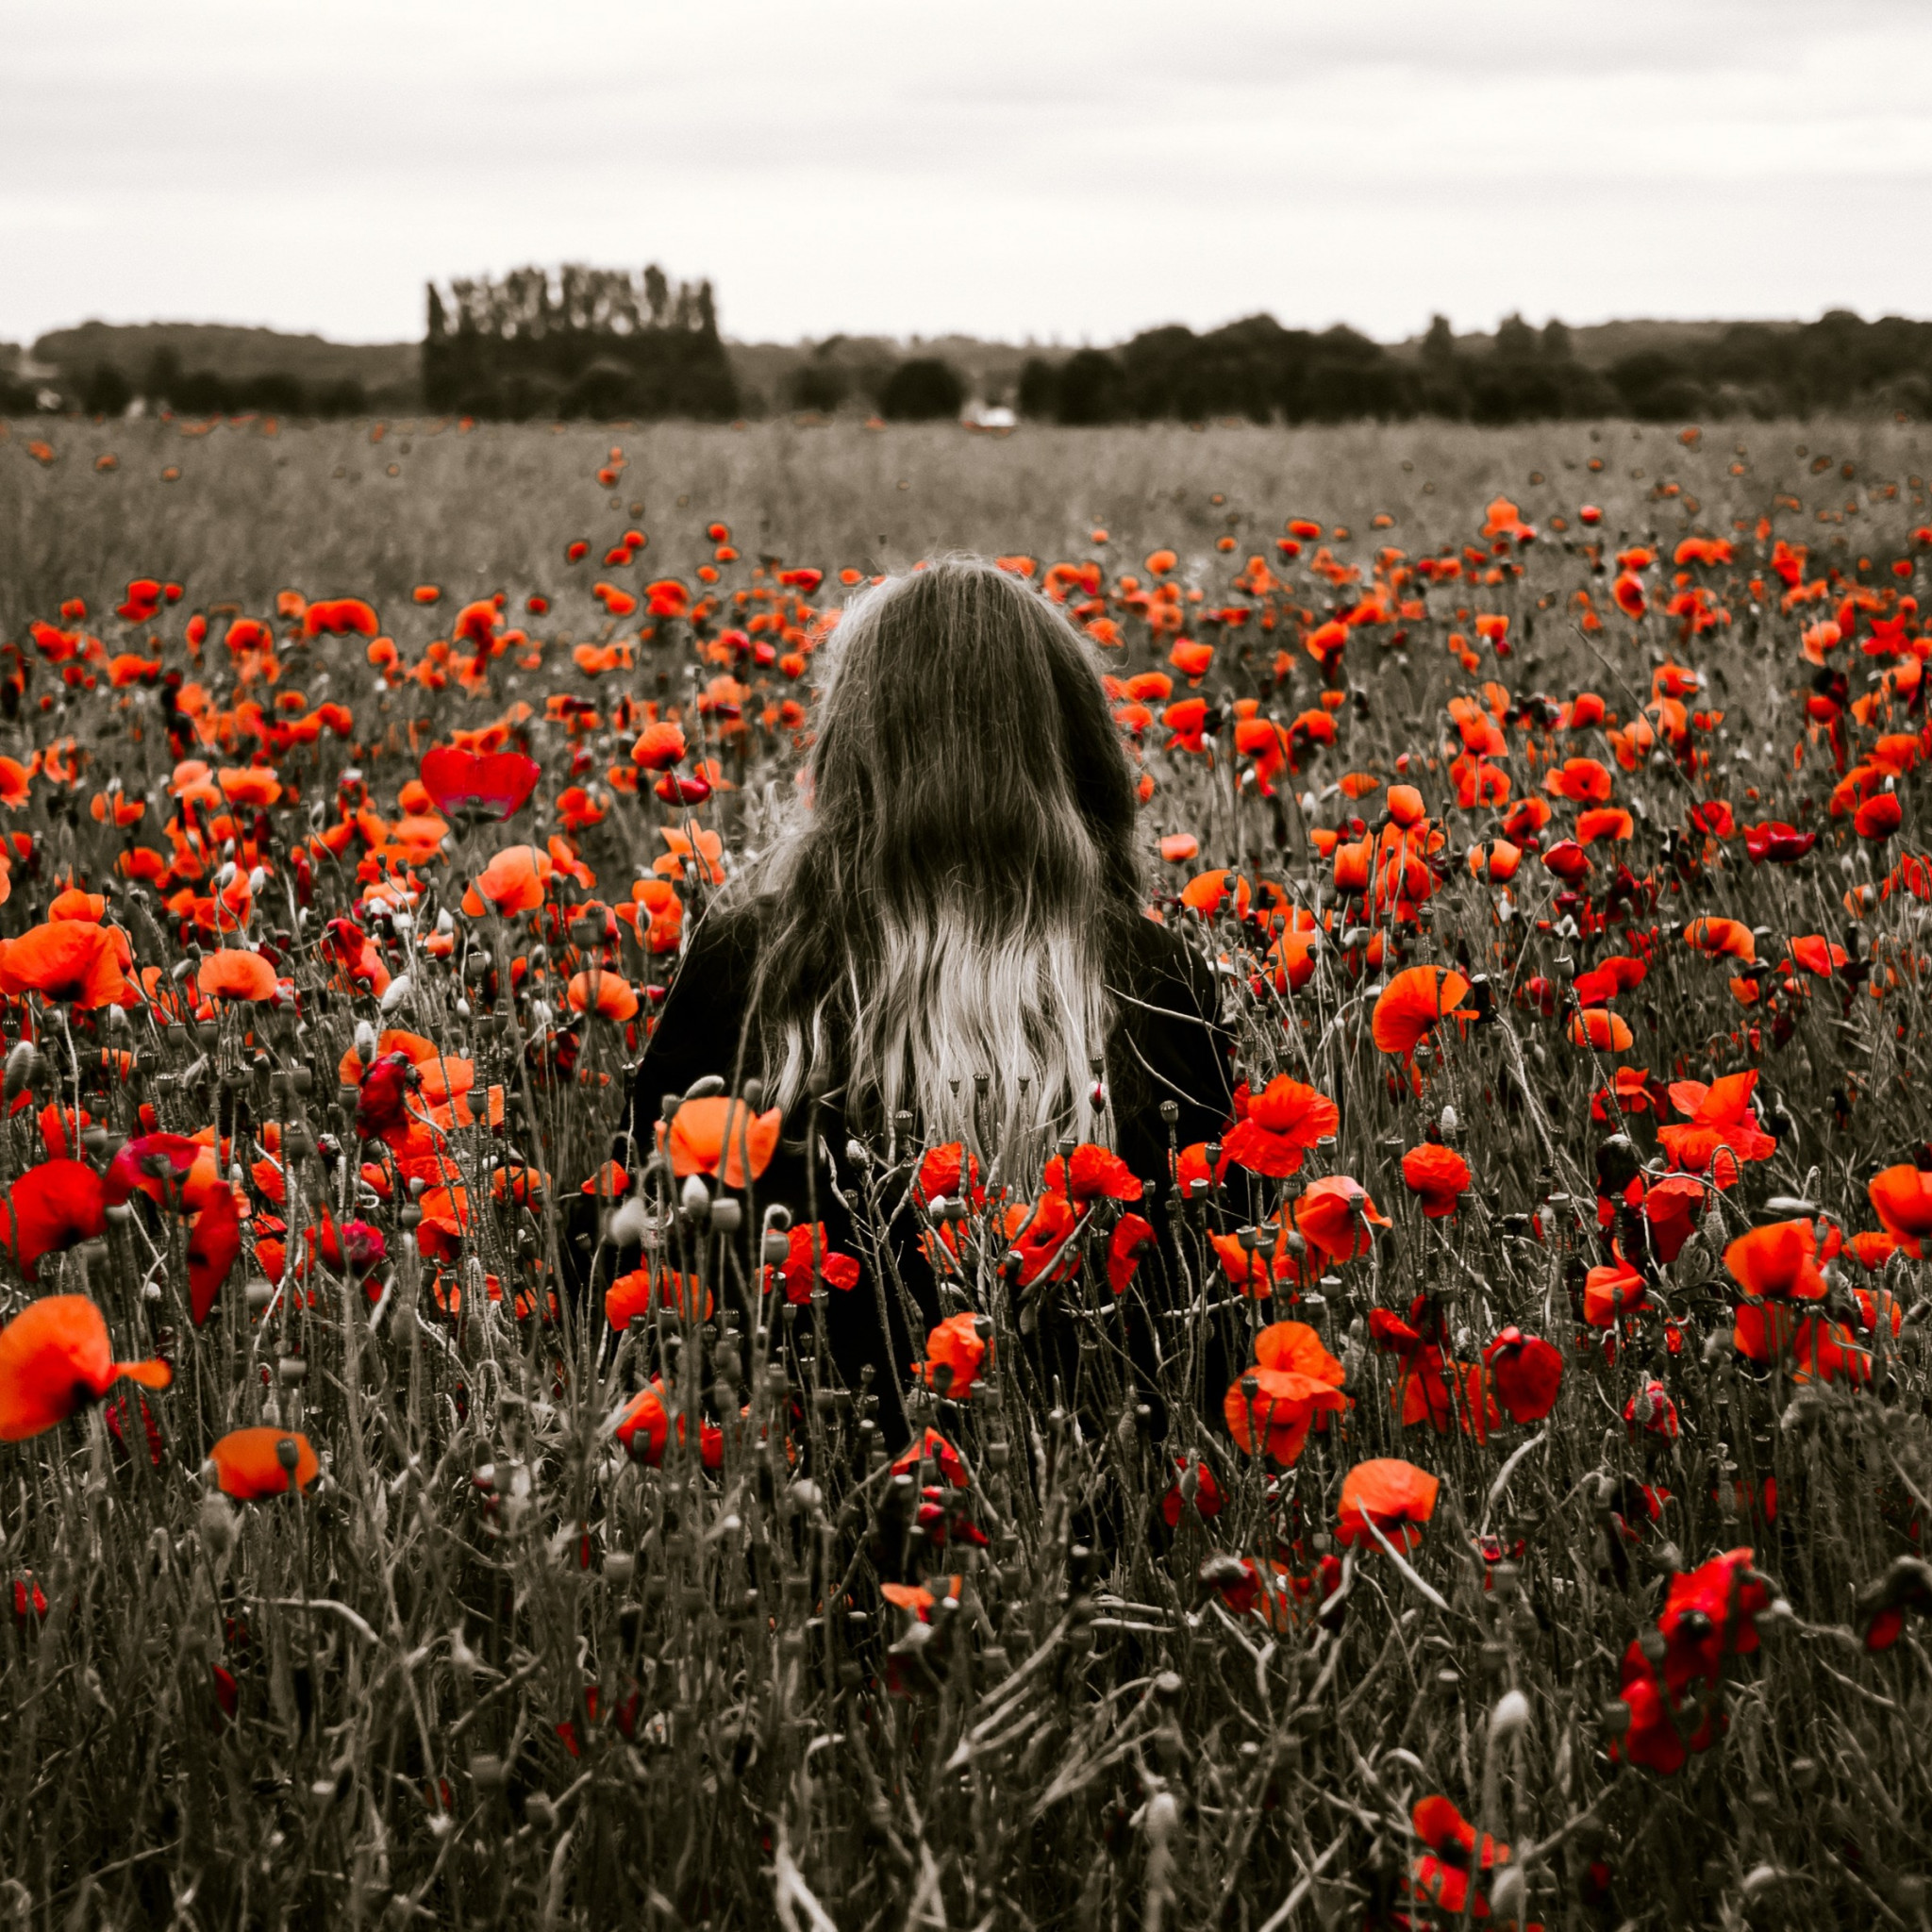 Girl in the field with red poppies wallpaper 2048x2048